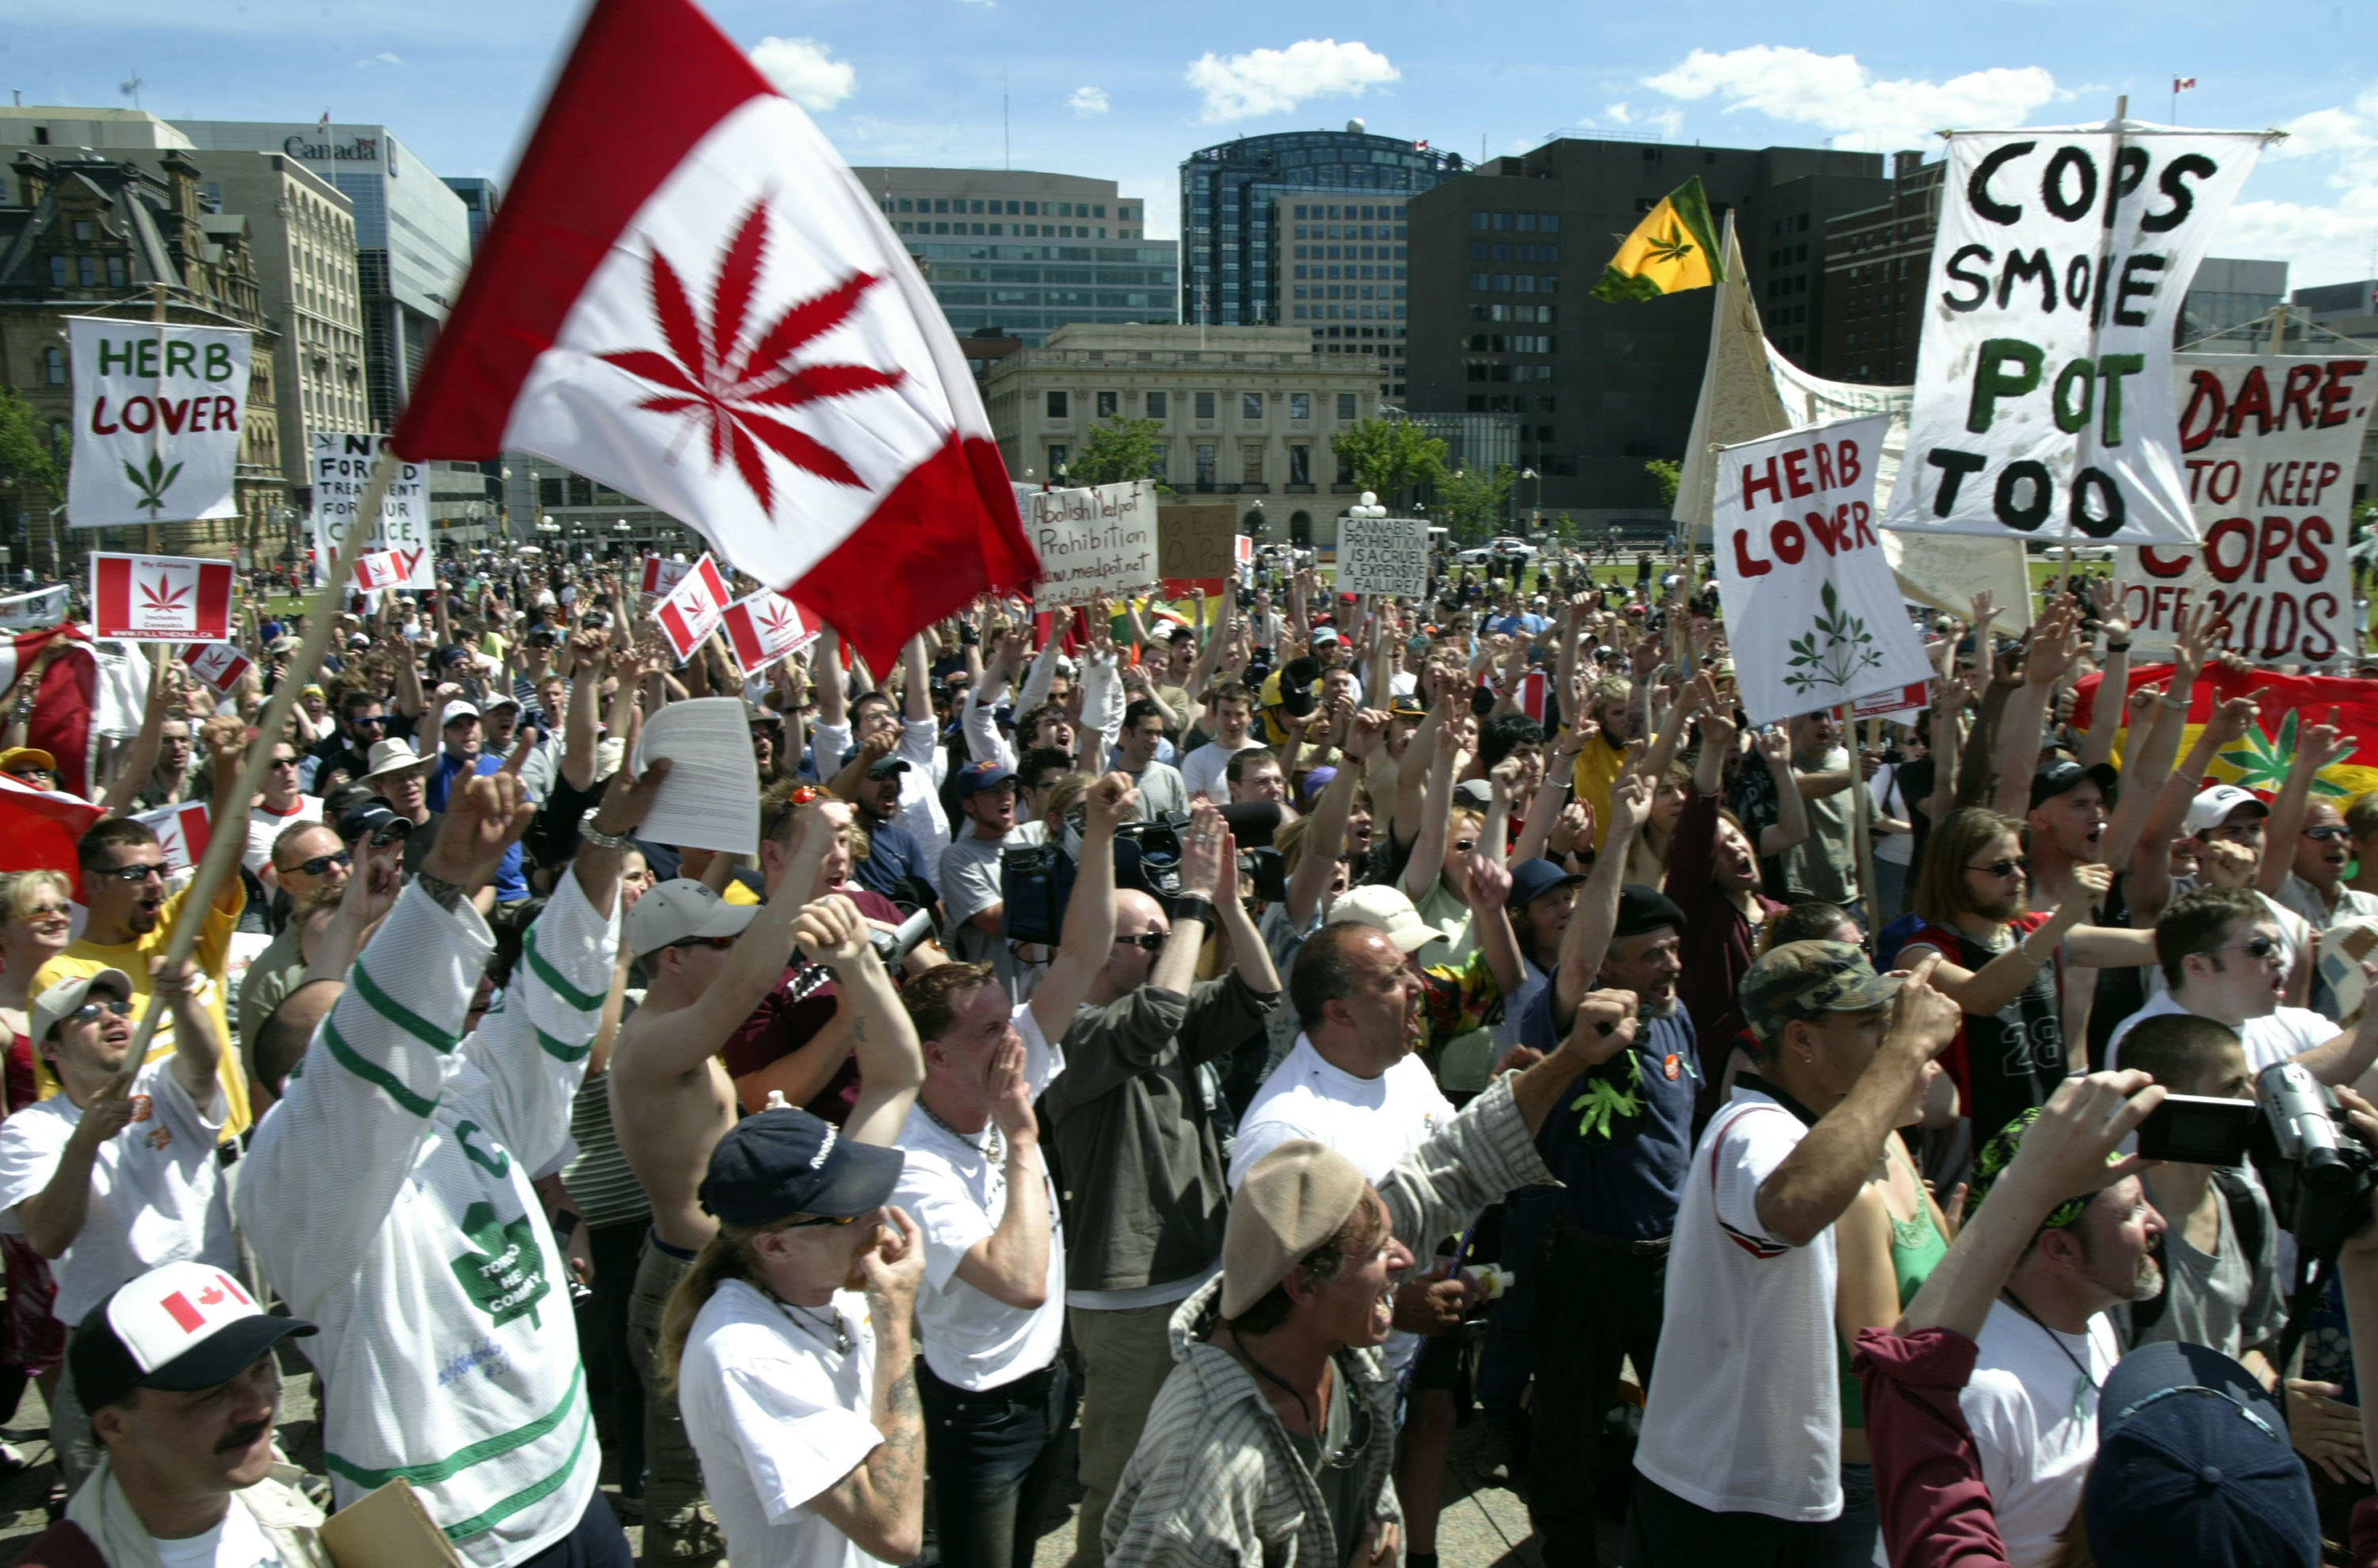 Protesters support pot legalization in Canada